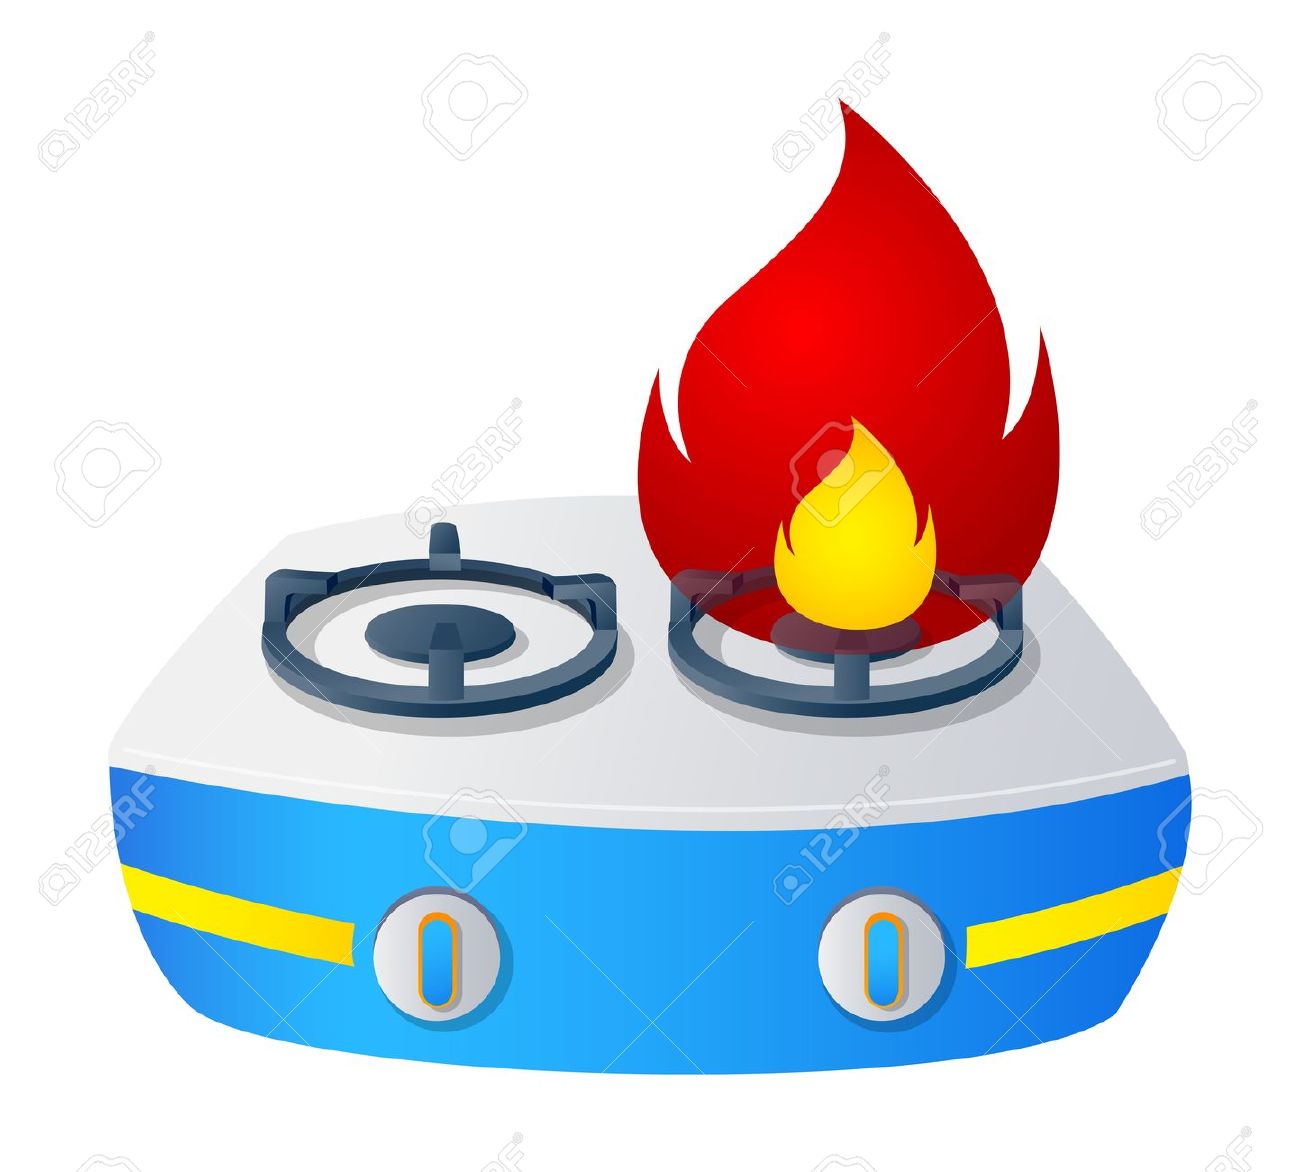 flames clipart stove fire